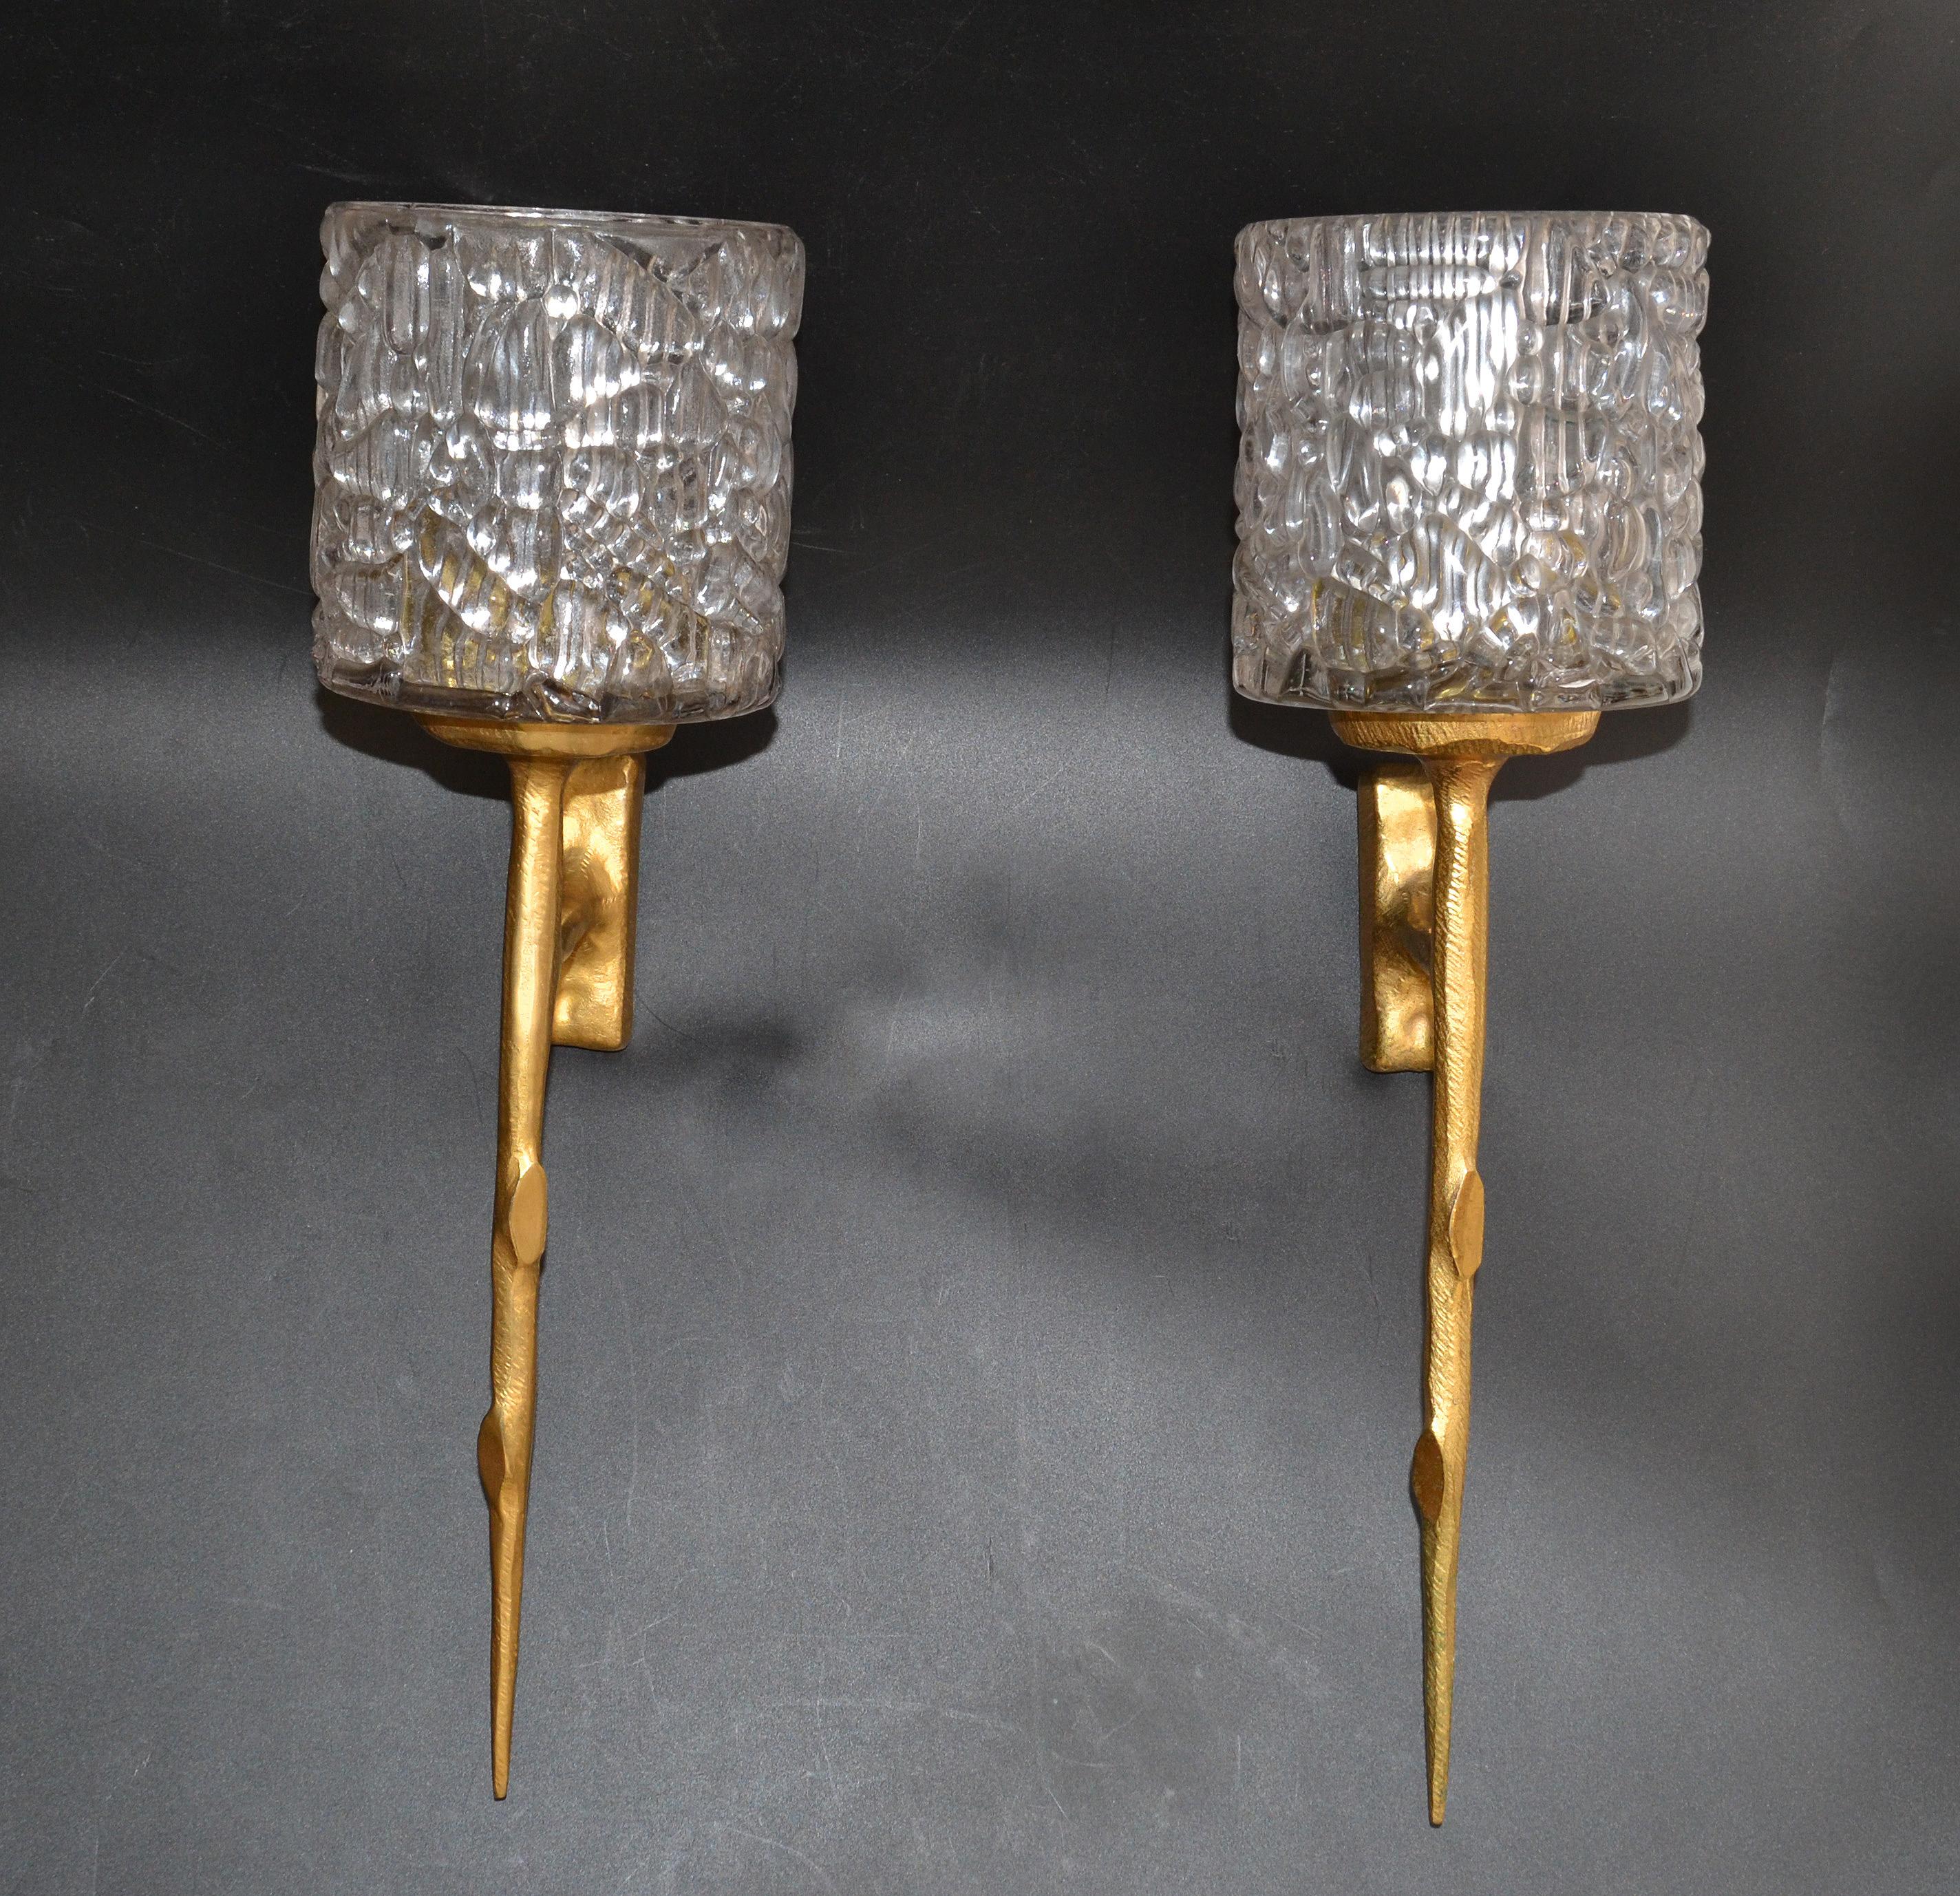 Pair of Agostini Style Sconces Bronze with Cut Crystal Glass Shades France 1950 For Sale 7